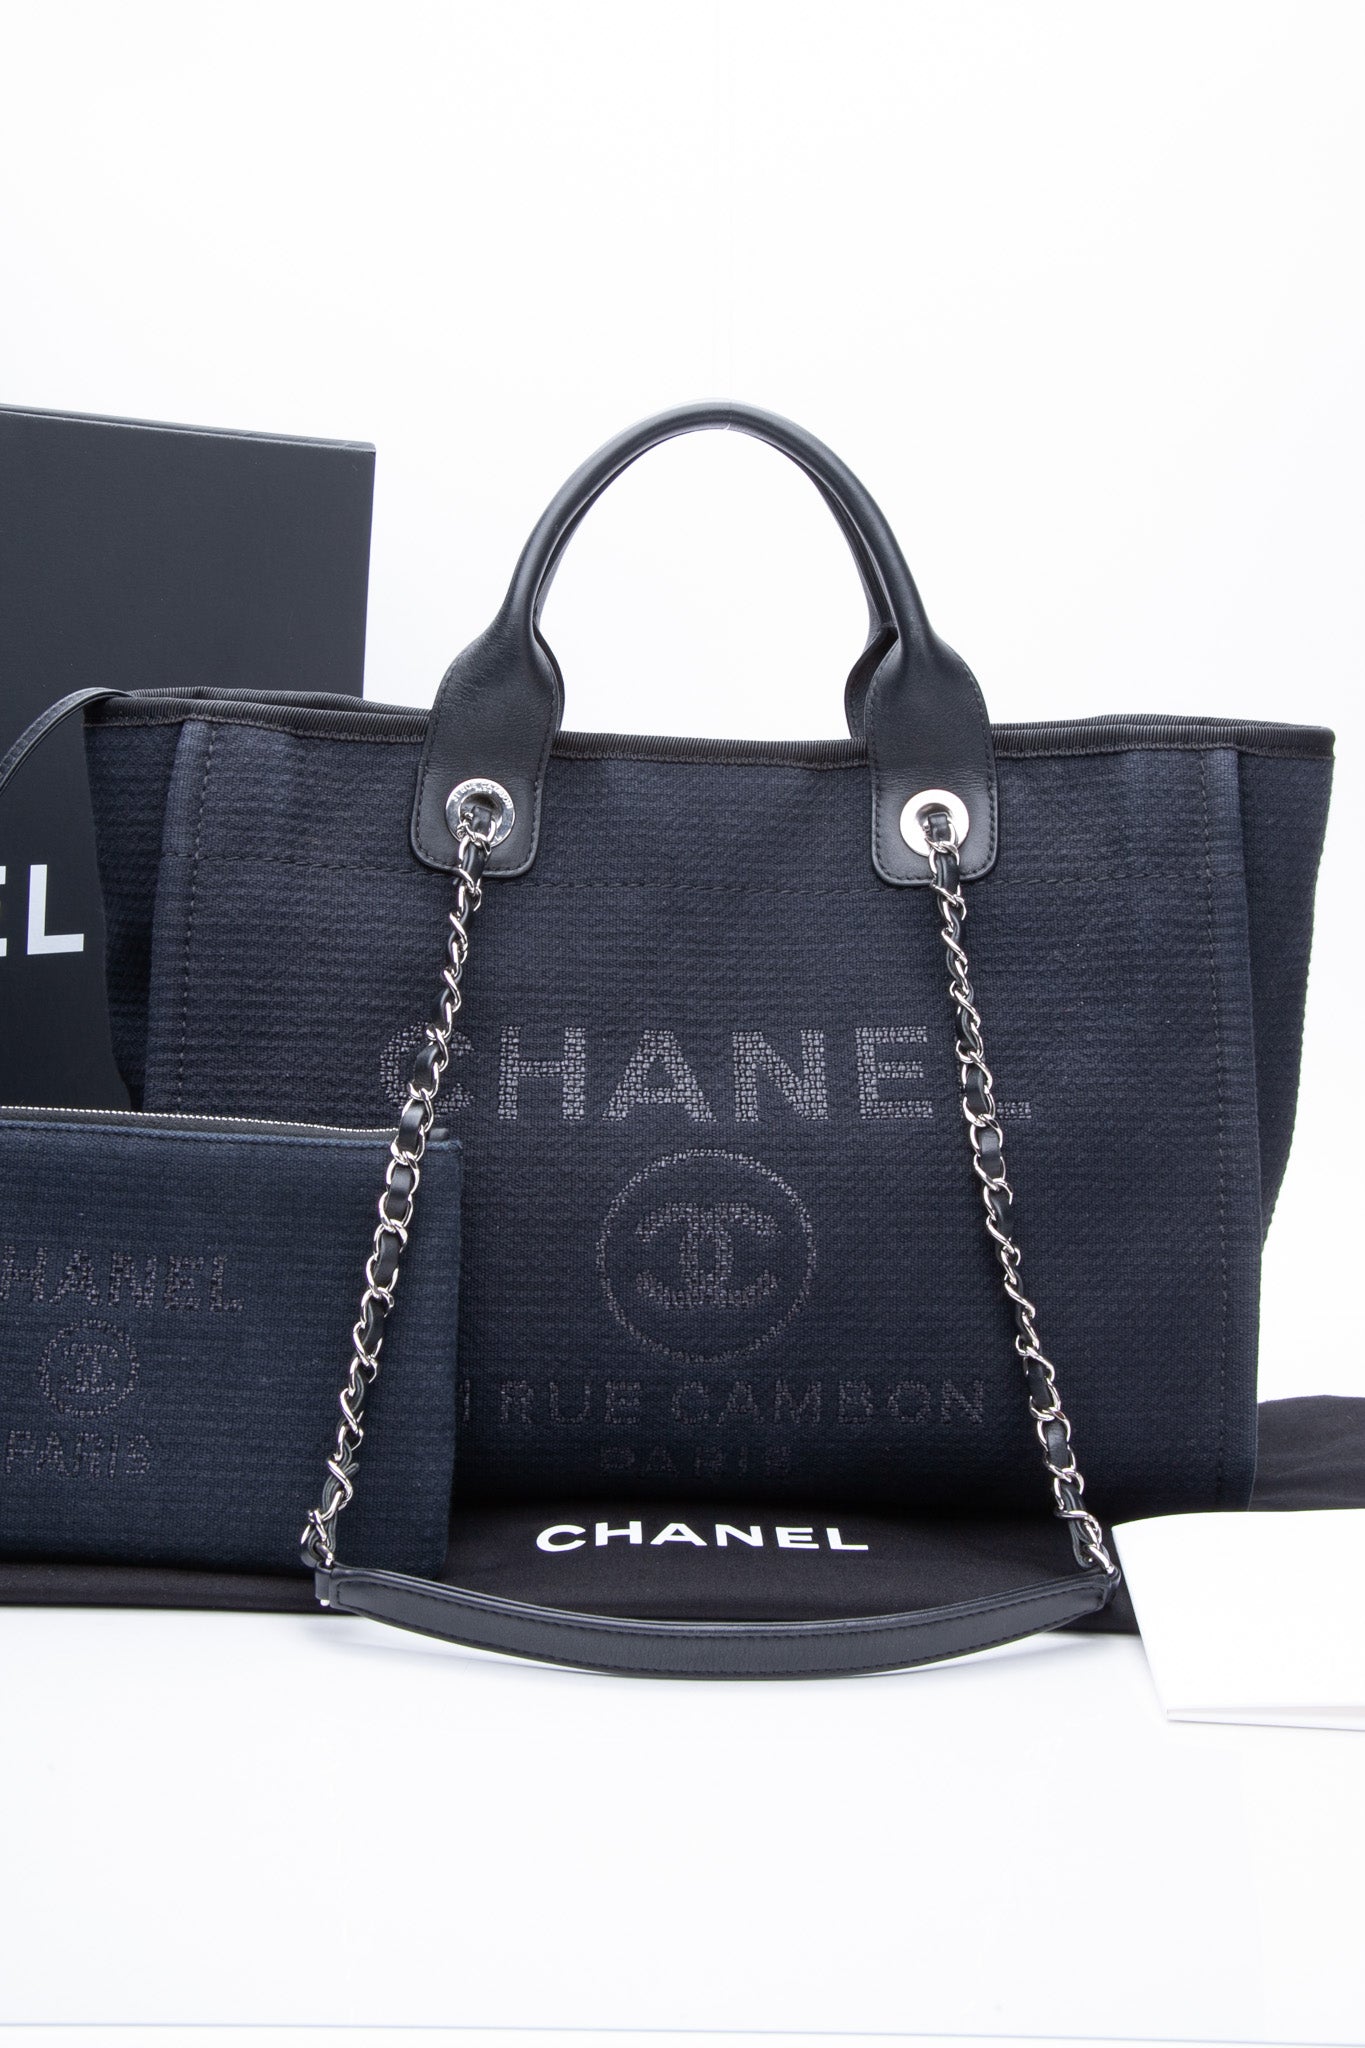 Chanel - Authenticated Cambon Handbag - Leather Black for Women, Very Good Condition